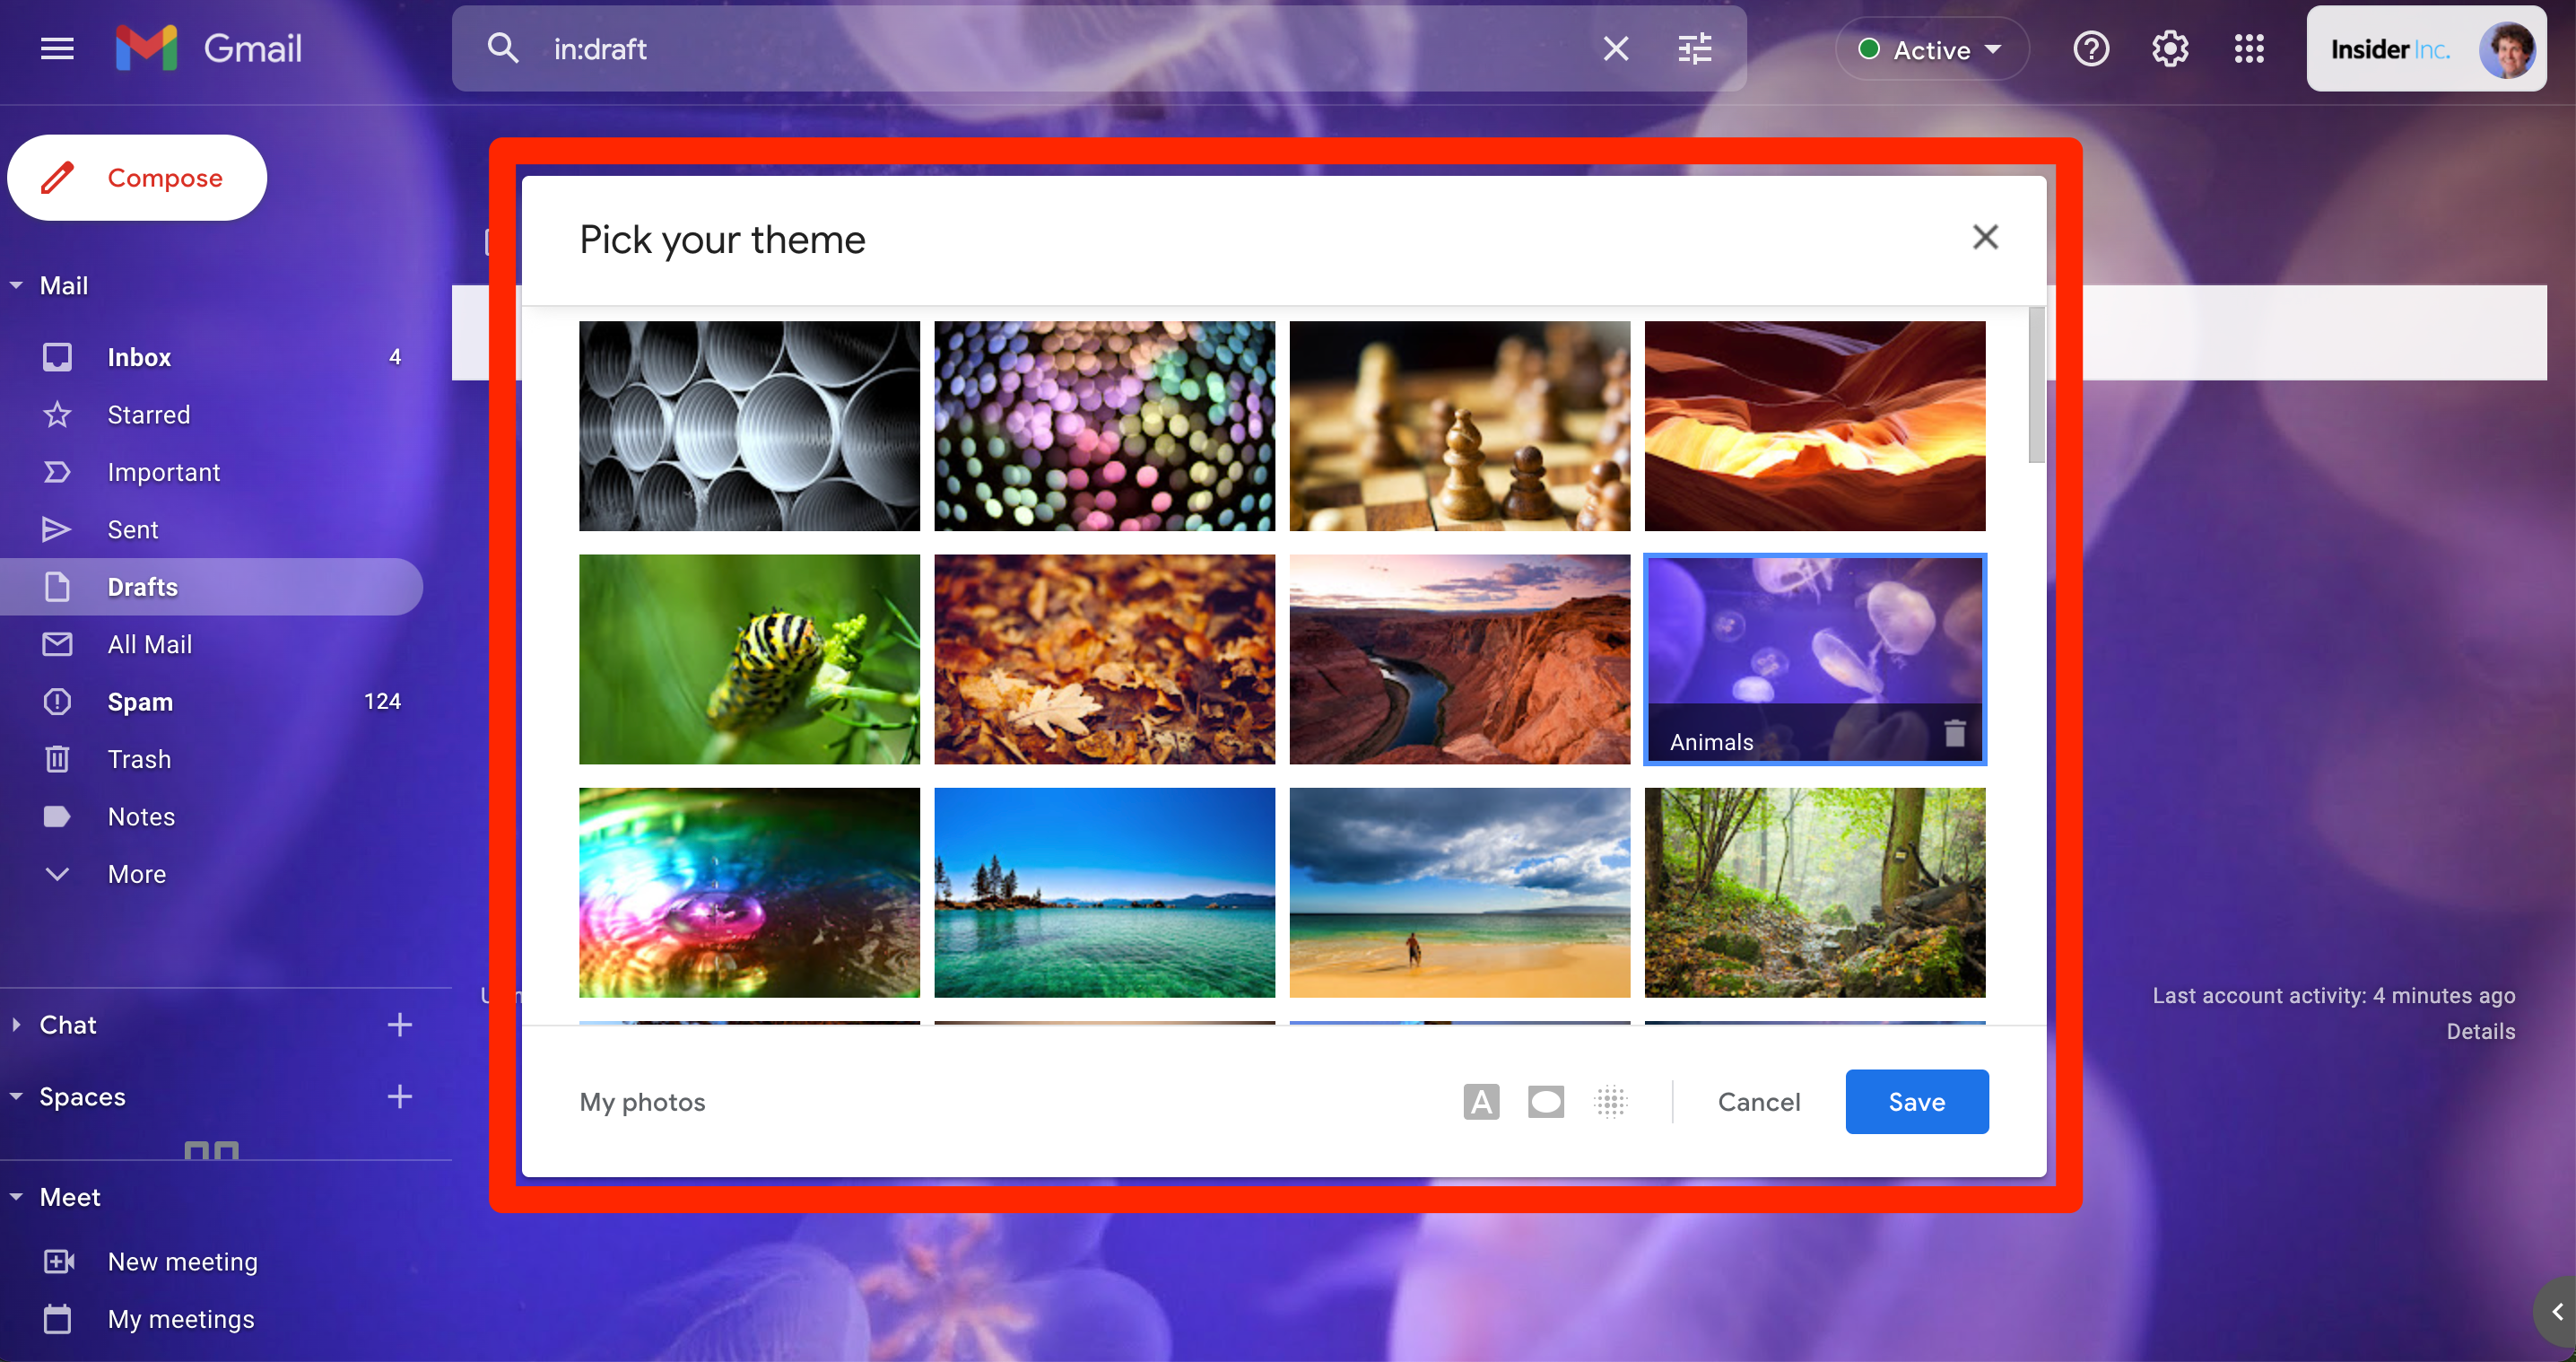 Some of the different backgrounds that users can choose from in Gmail.